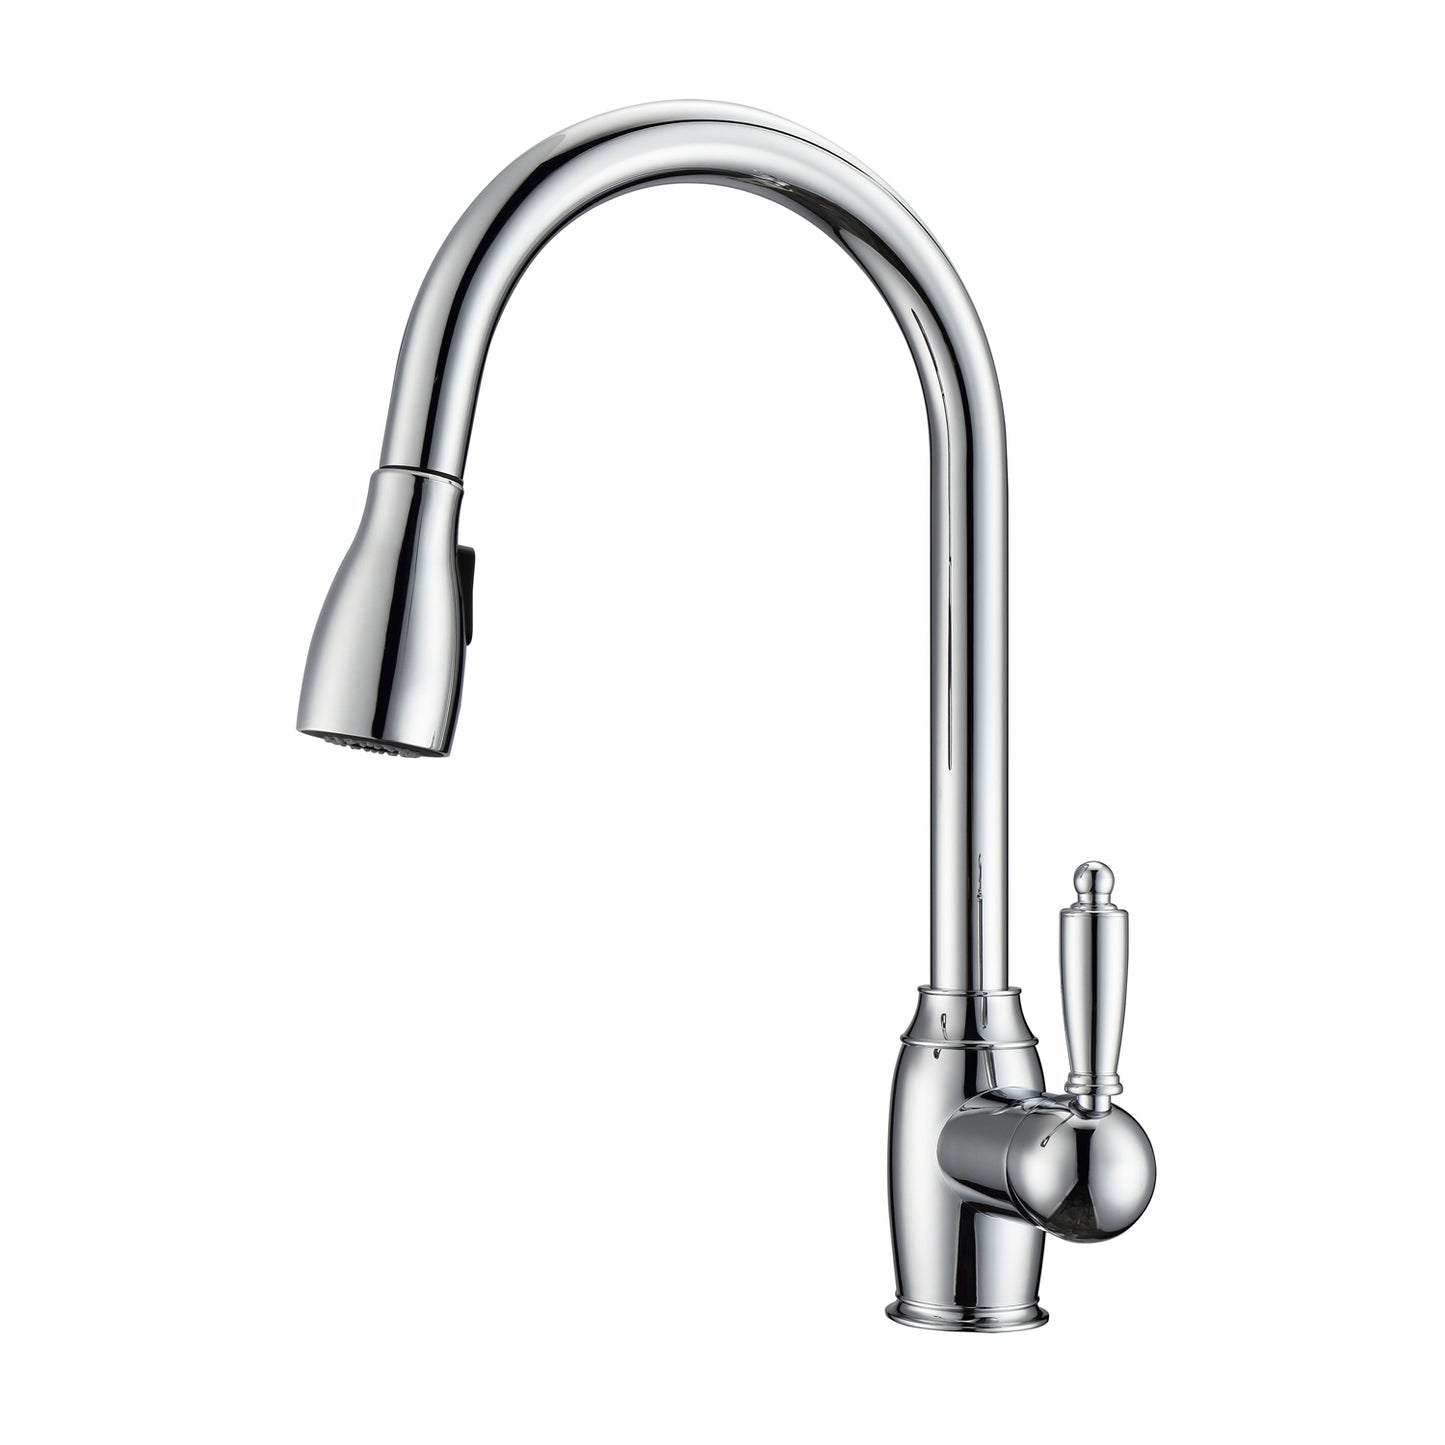 Bristo 2 Kitchen Faucet, Pull-Out Sprayer, Single Lever Handle, Chrome